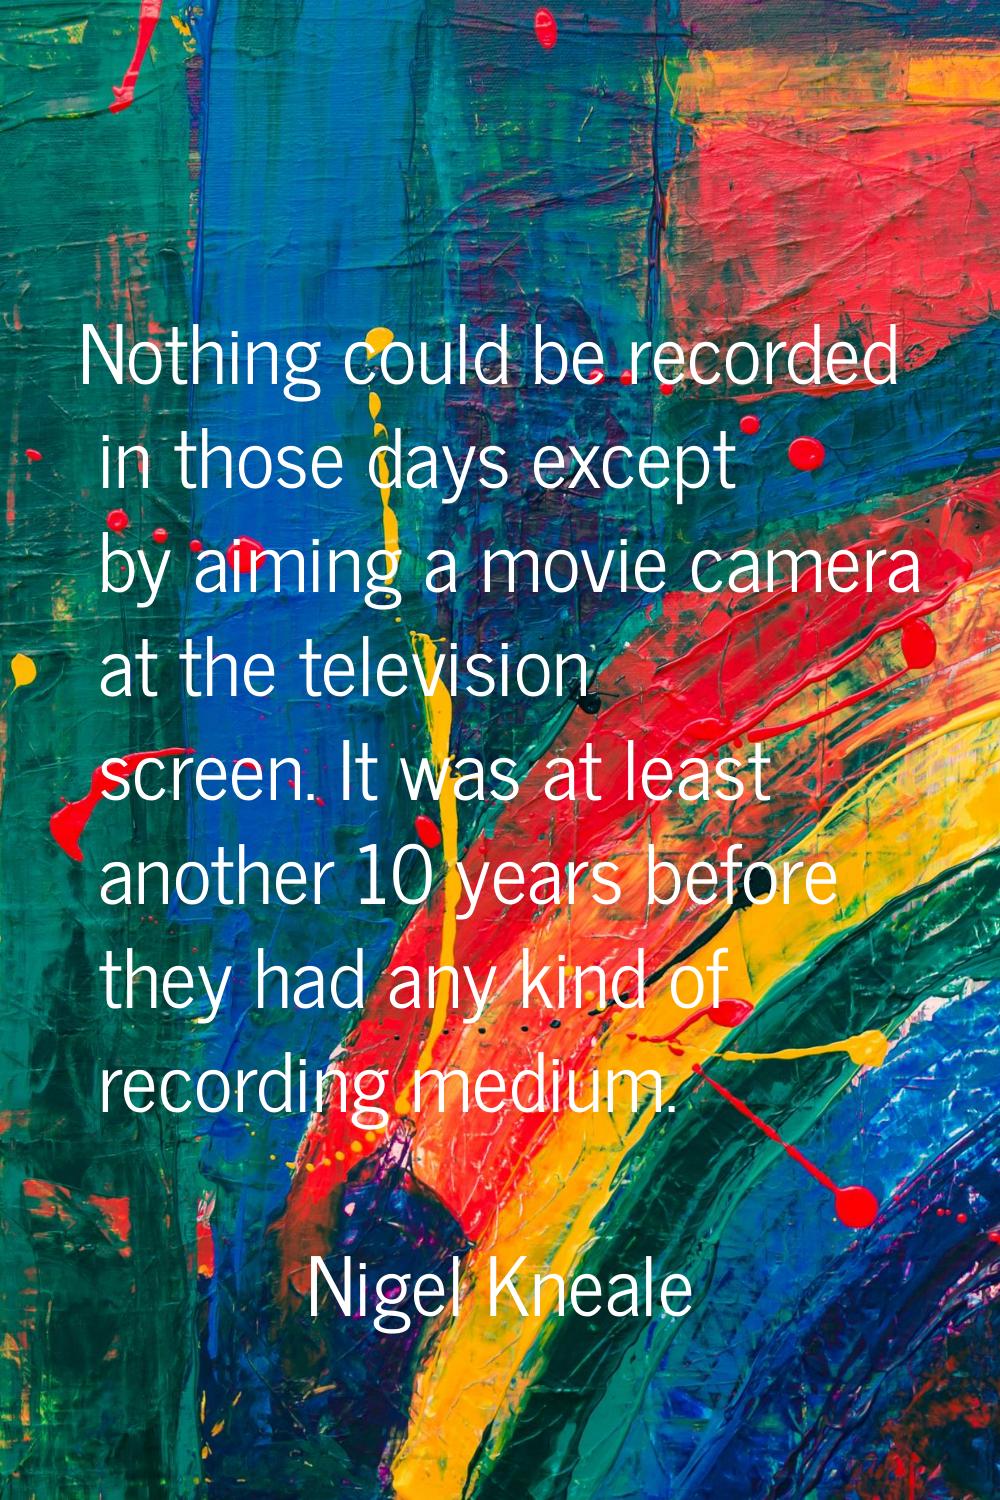 Nothing could be recorded in those days except by aiming a movie camera at the television screen. I